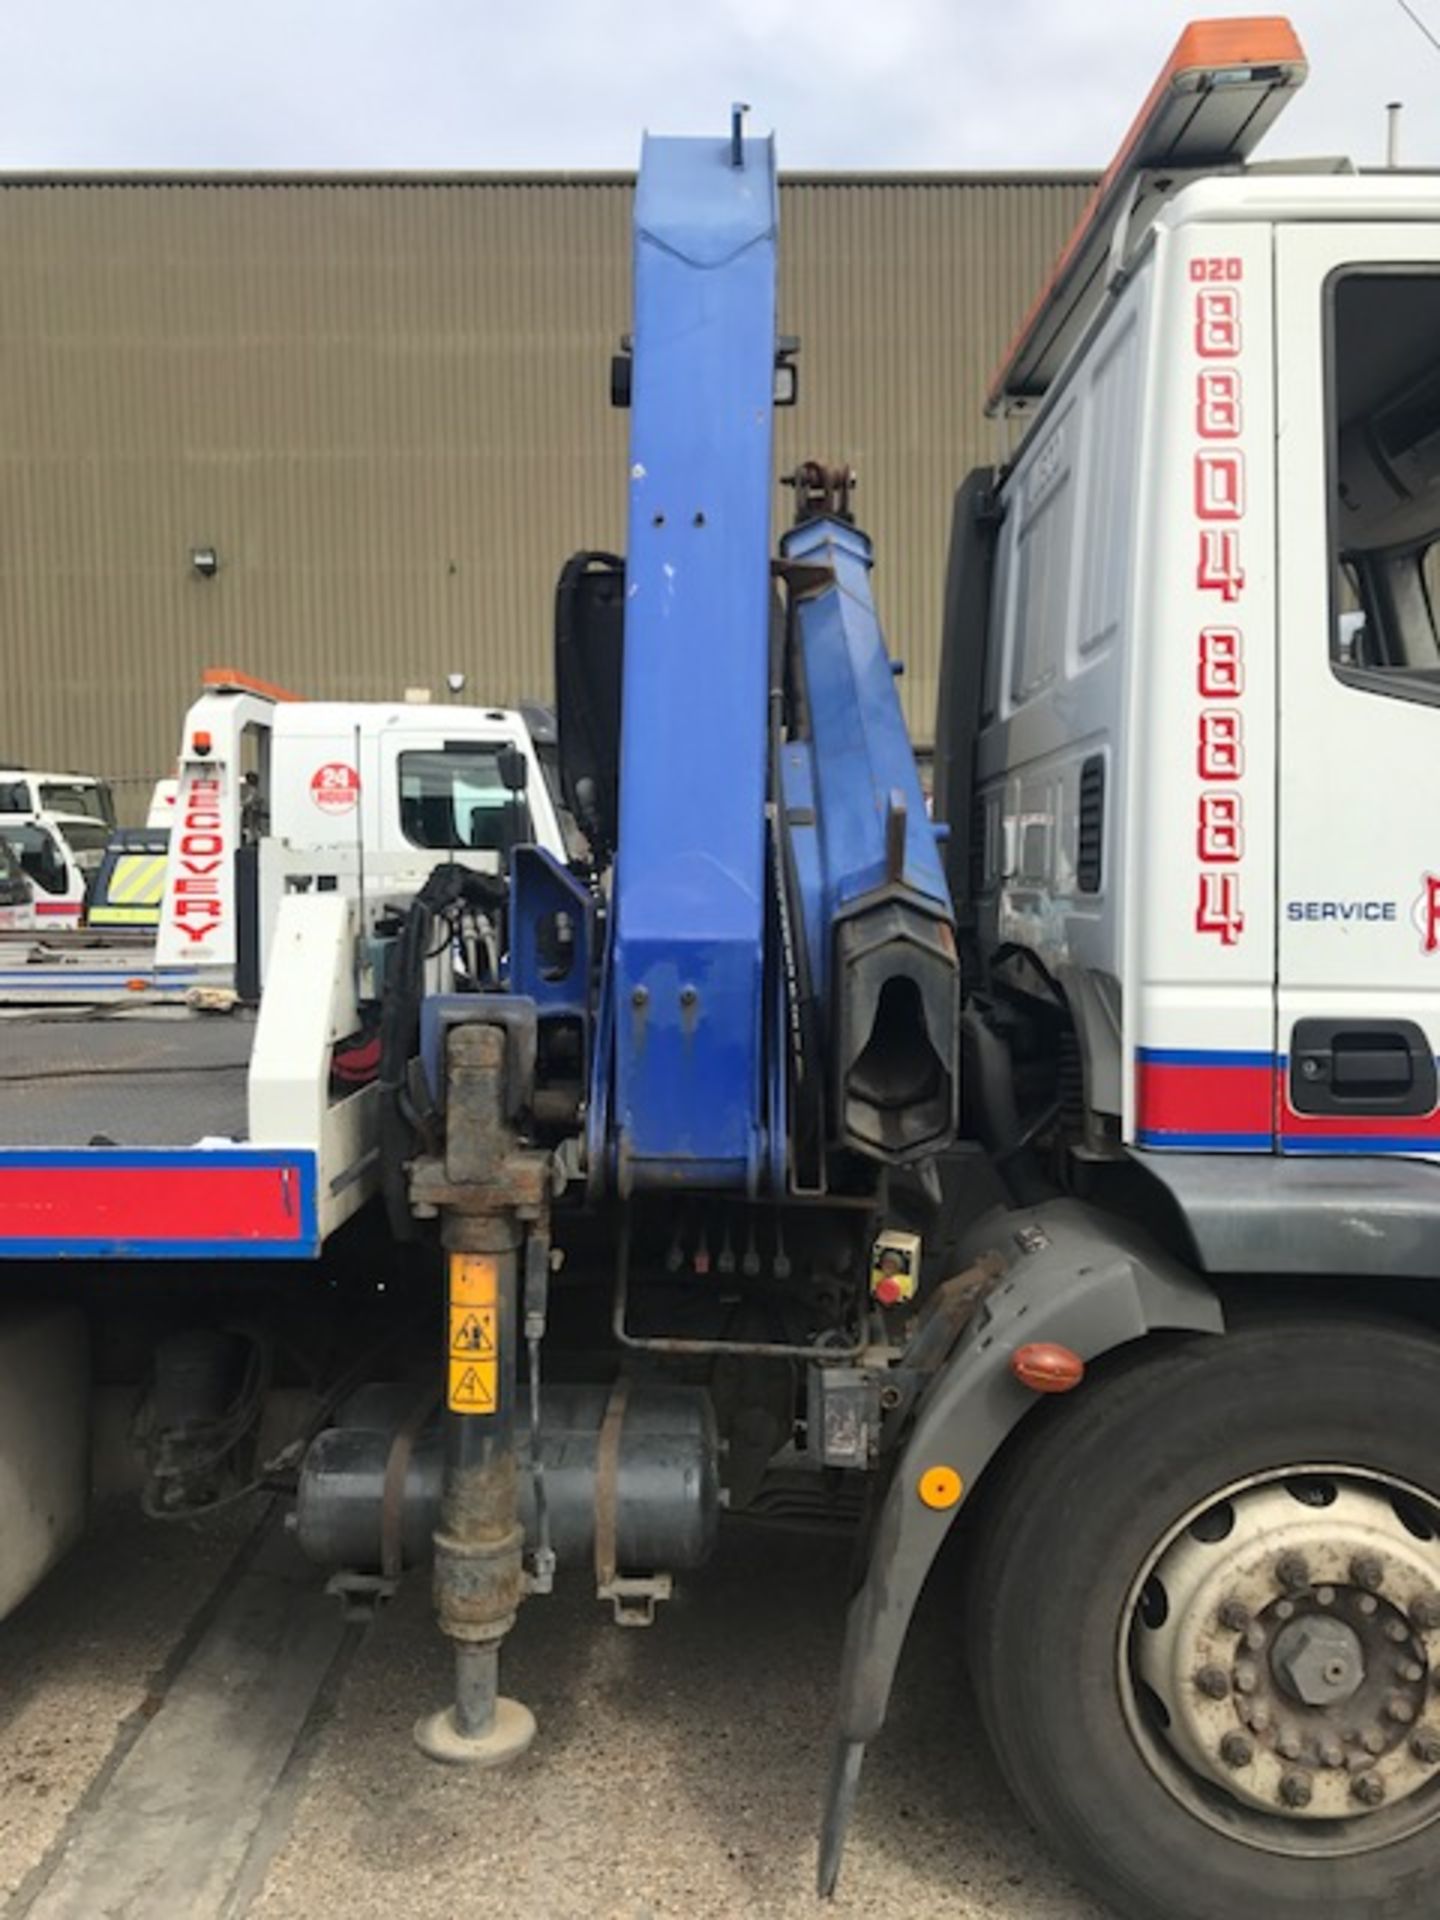 2007 Iveco Eurocargo 180E25 18T day cab breakdown recovery vehicle complete with Hiab crane, Roger - Image 9 of 16